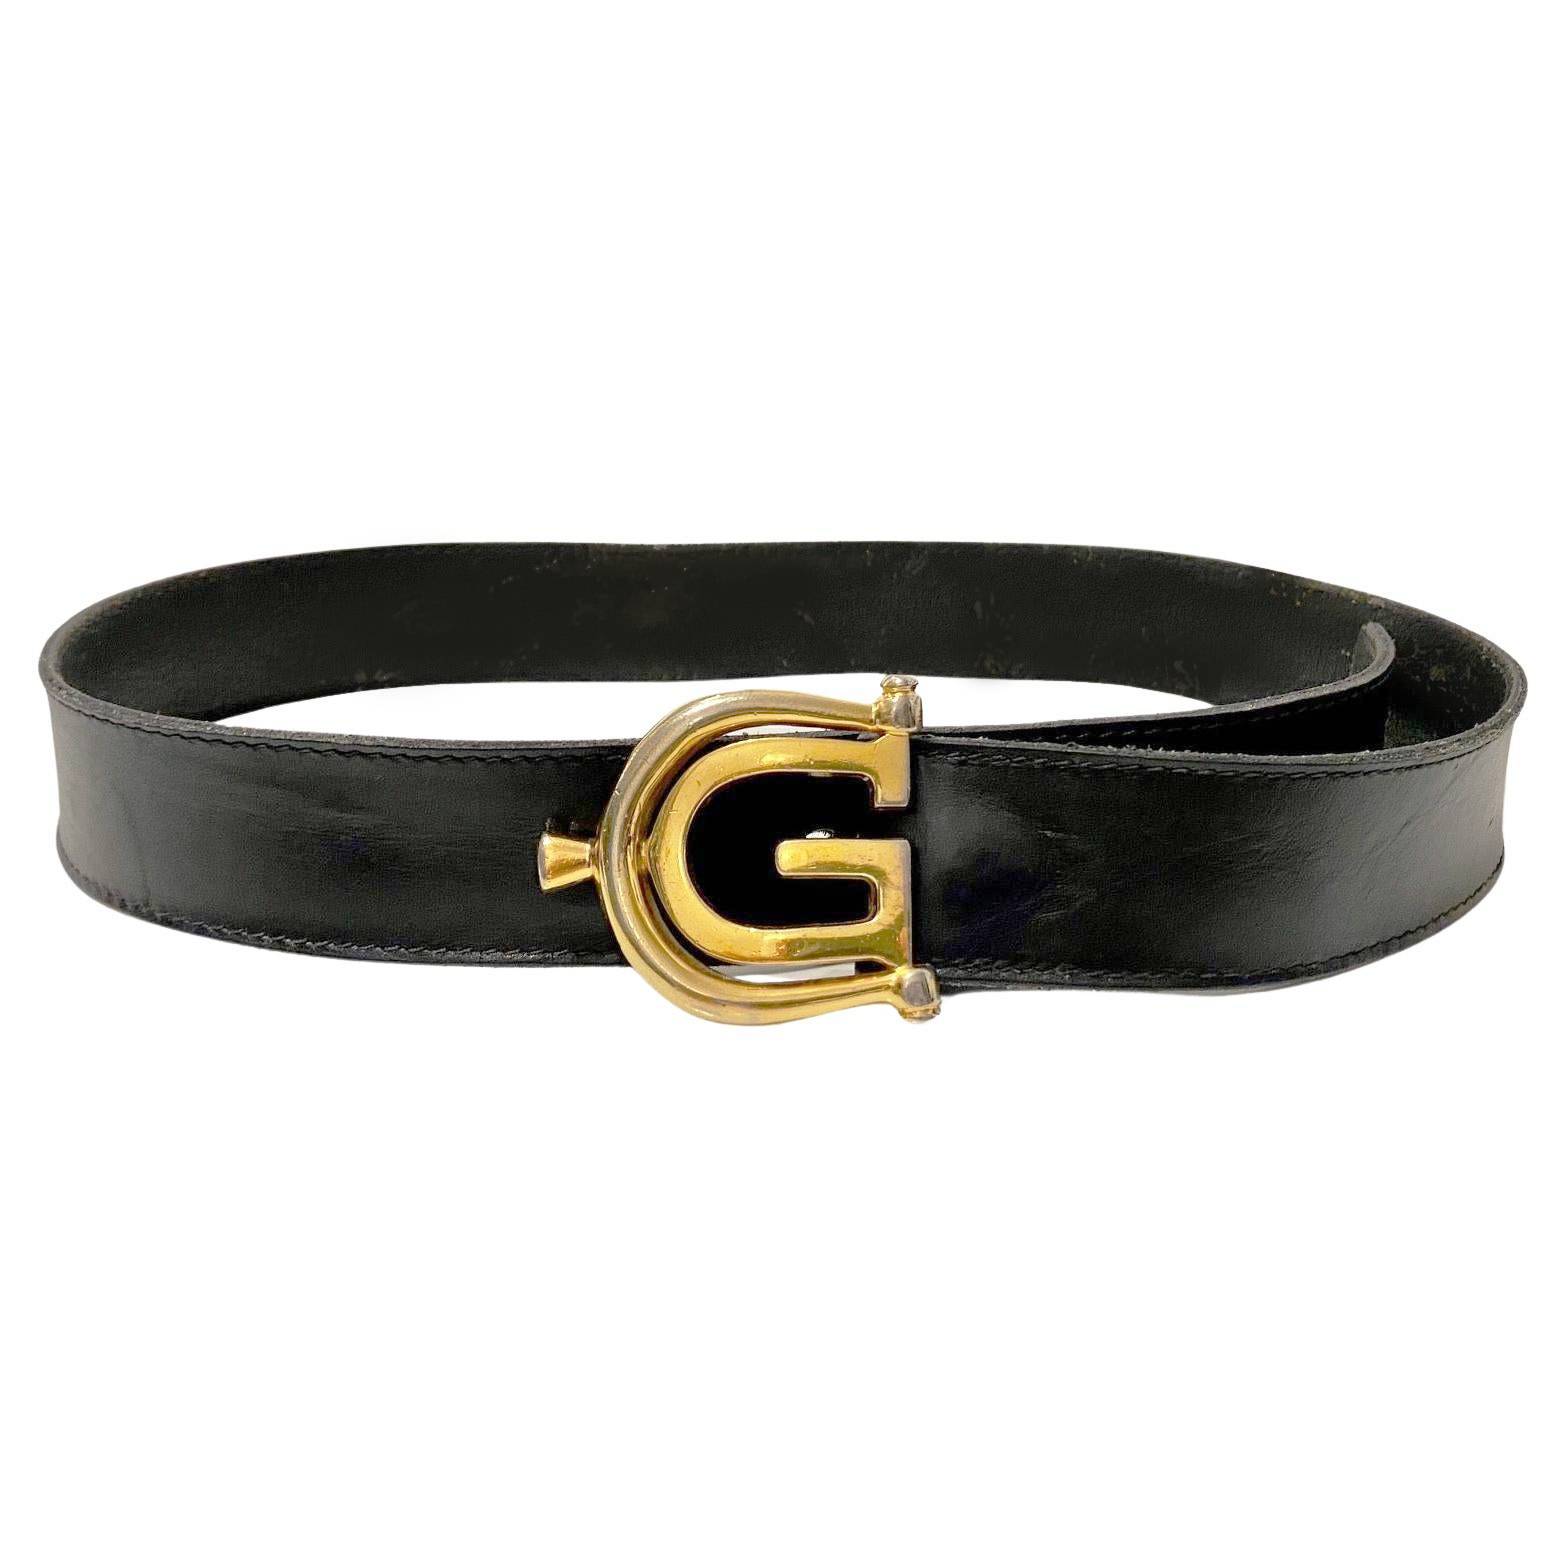 1980s Gucci GG Gold Metal Buckle Black Leather Belt - style - CHNGR